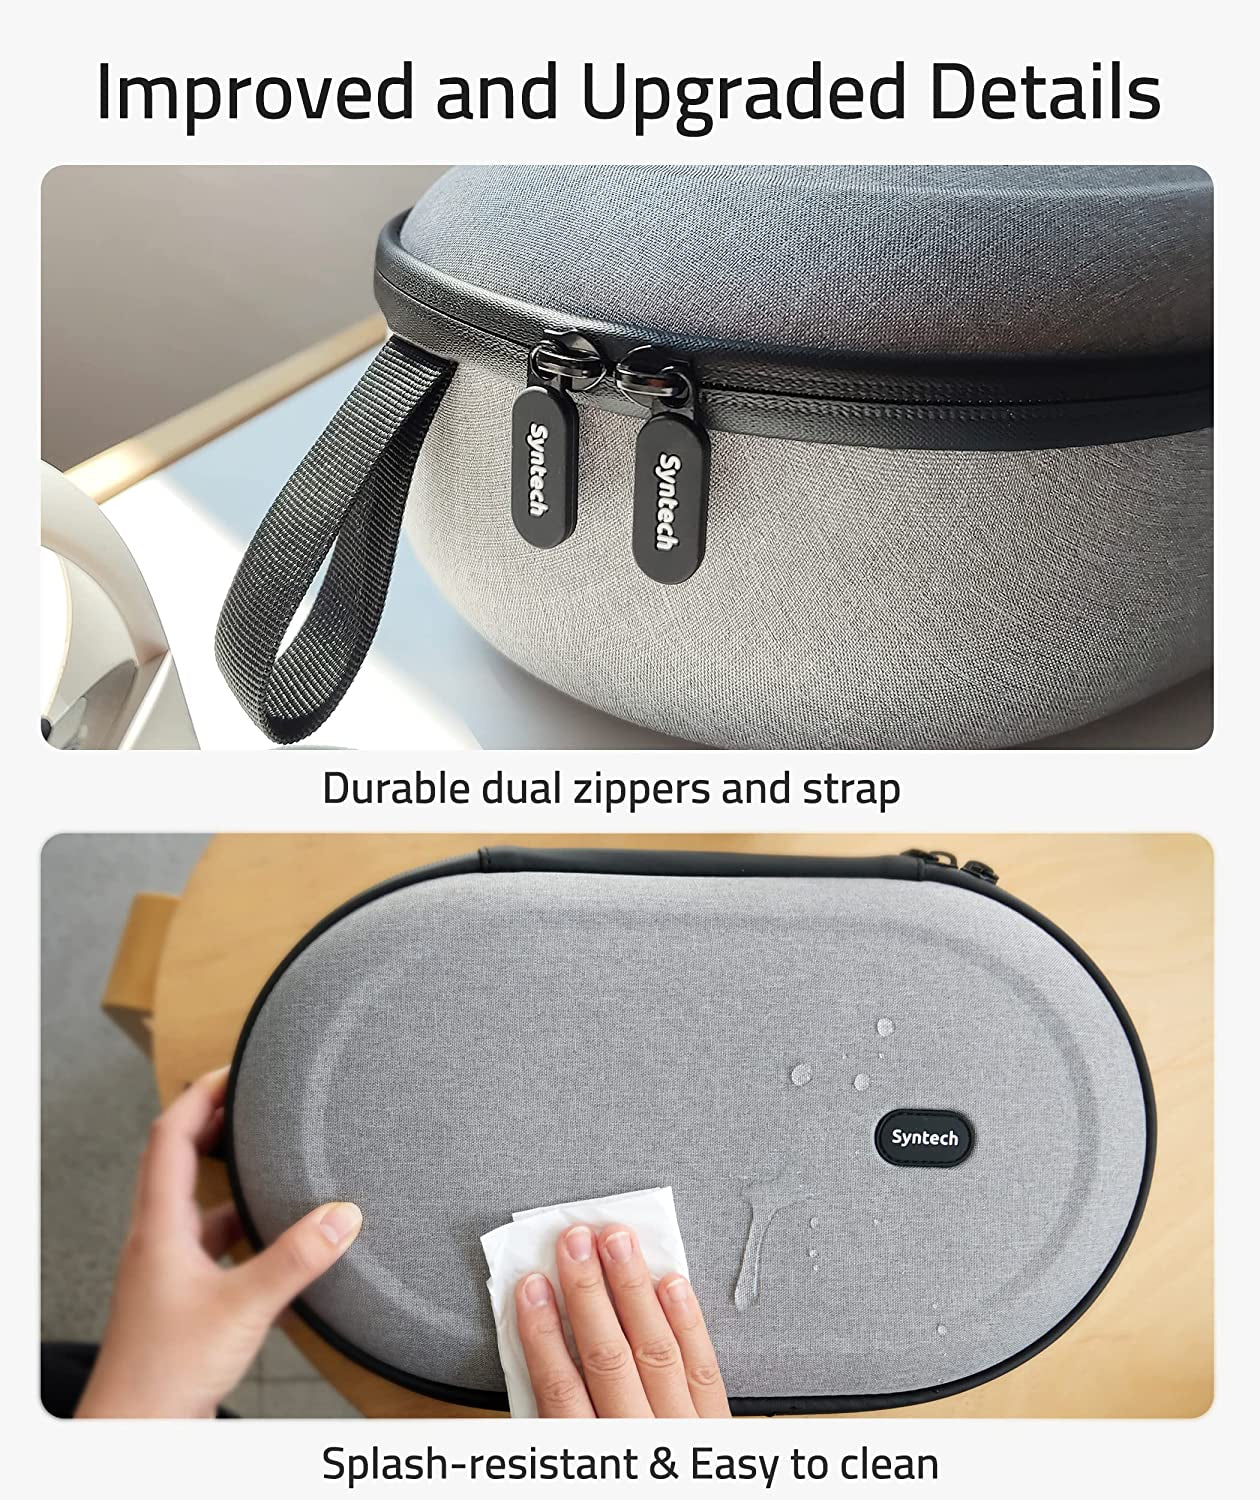 Syntech Hard Carrying Case Compatible with Meta/Oculus Quest 2 Accessories/Pico4/Pro VR Headset with Elite Strap, Touch Controllers and Other Accessories, Ultra-Sleek Design for Travel, Storage, Gray